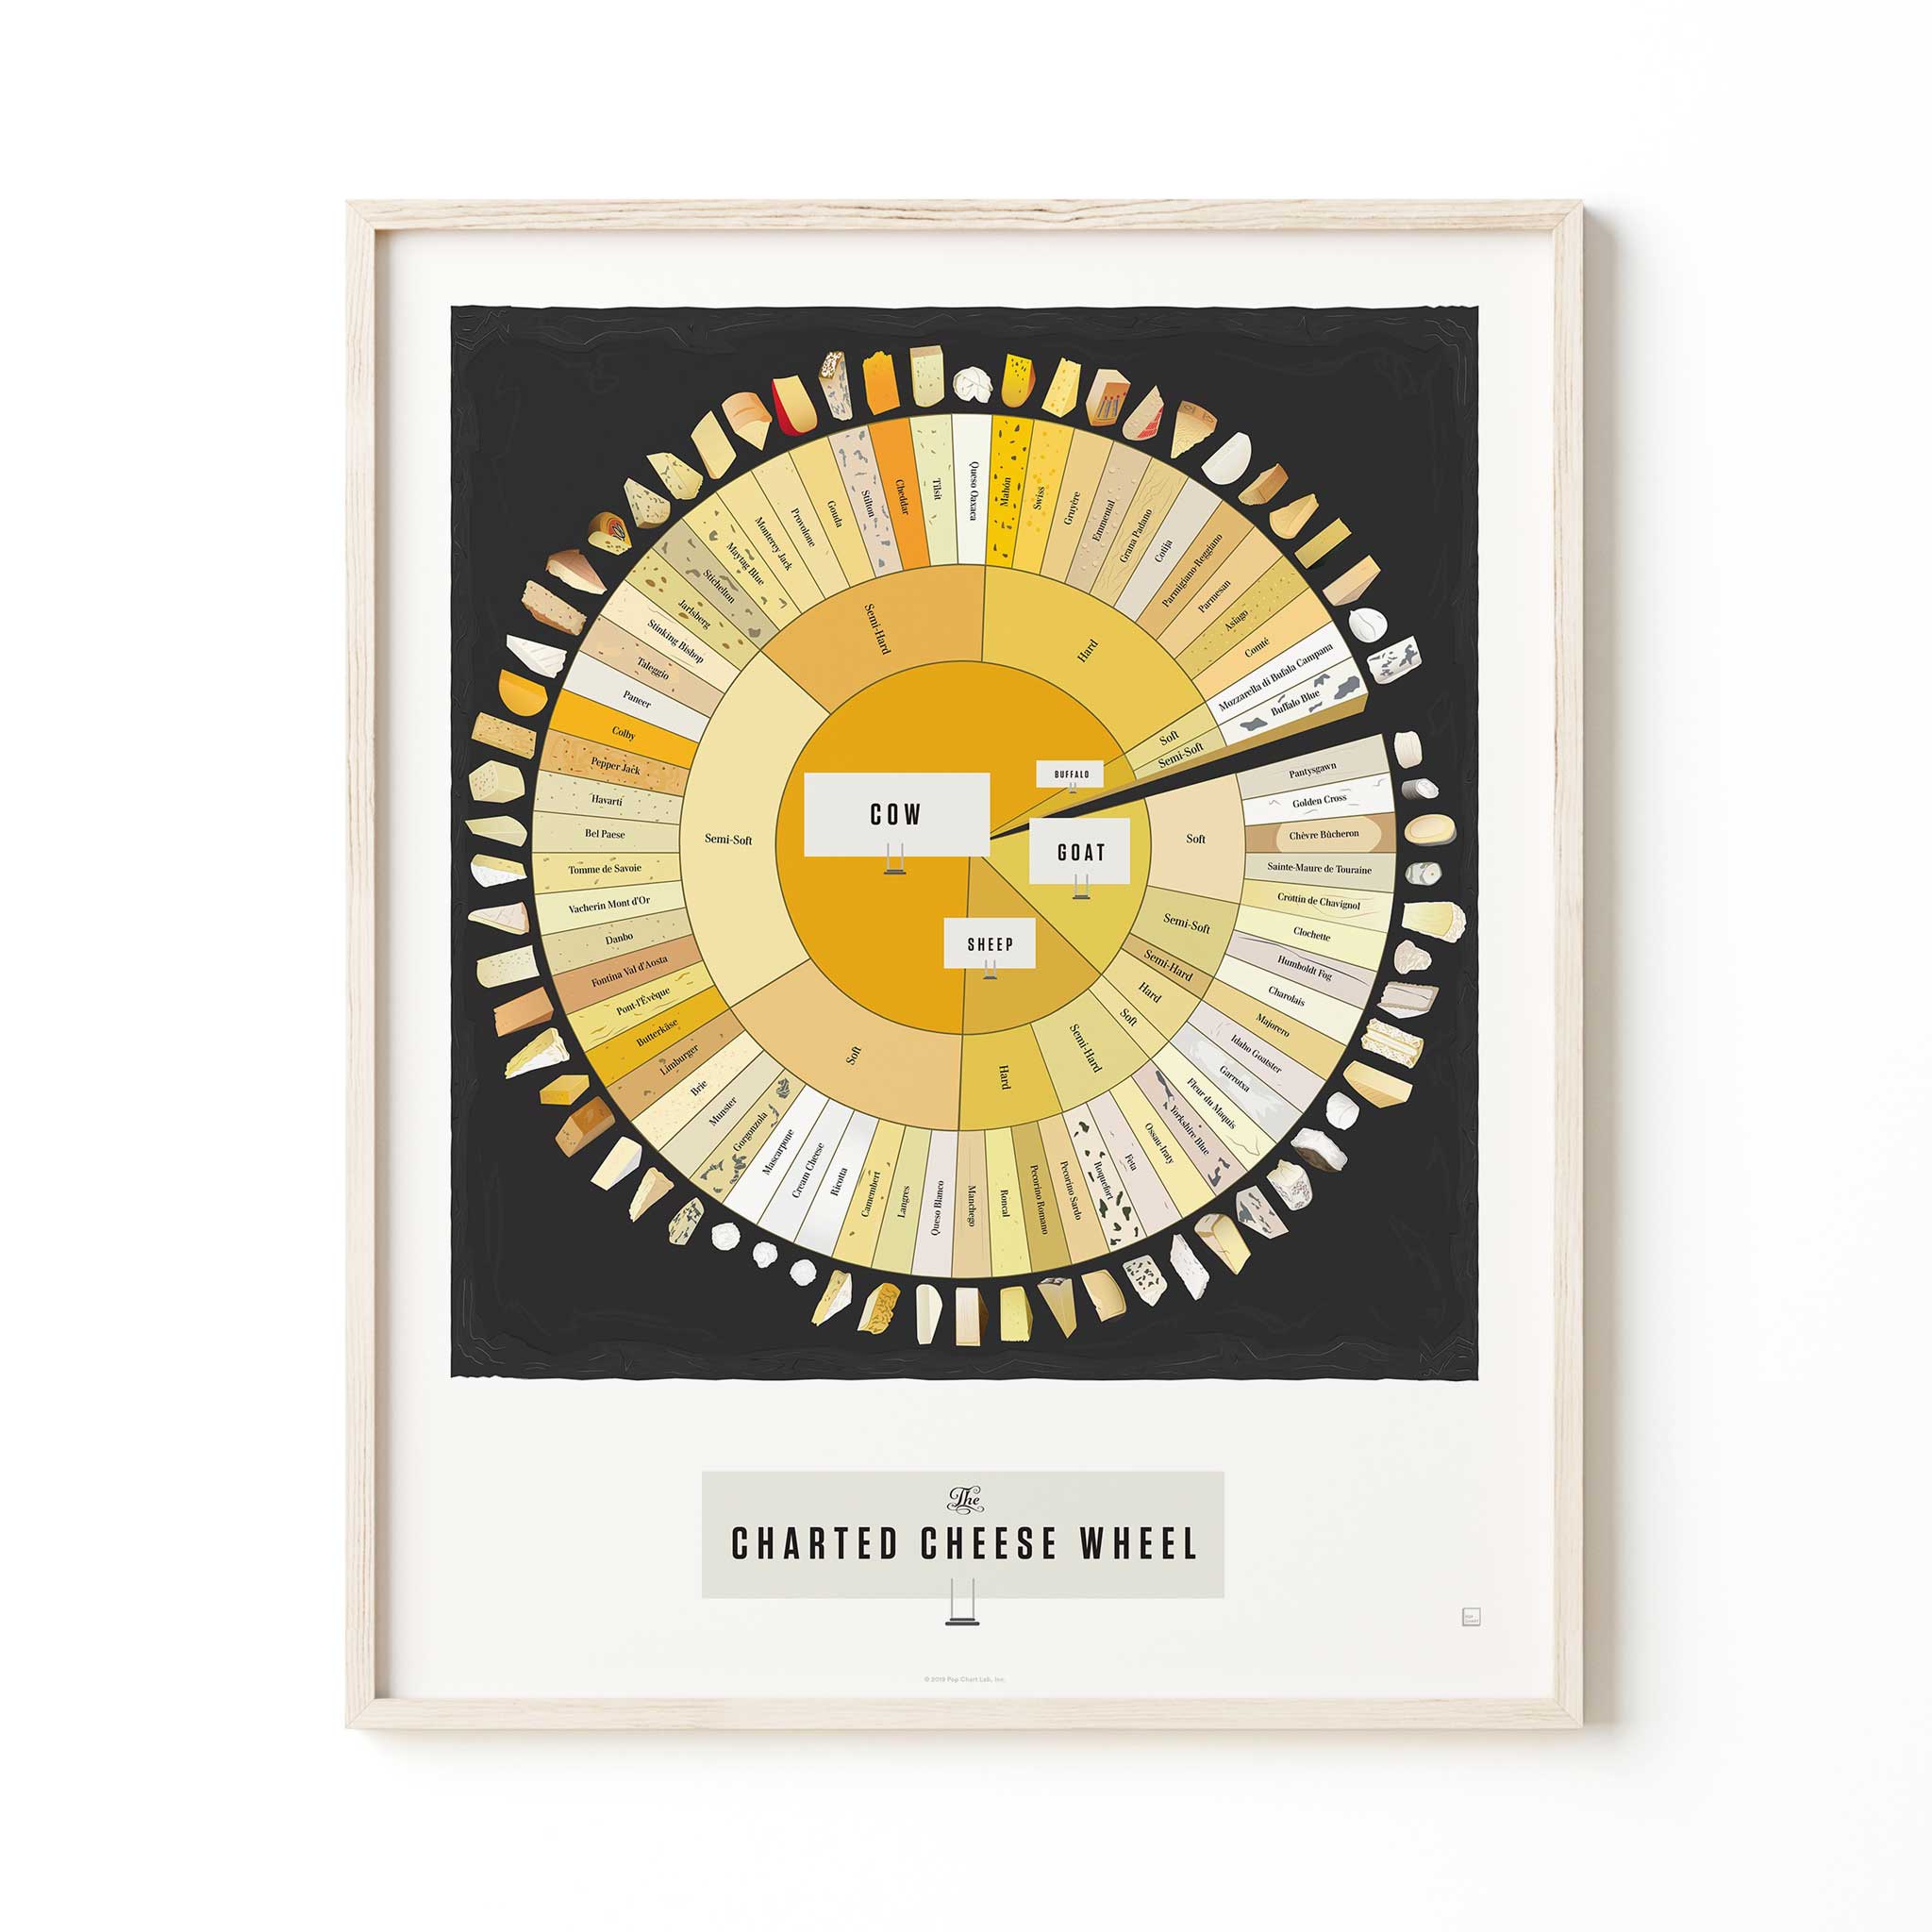 THE CHARTED CHEESE WHEEL | Infographic CHEESE POSTER | 41x51 cm | Pop Chart